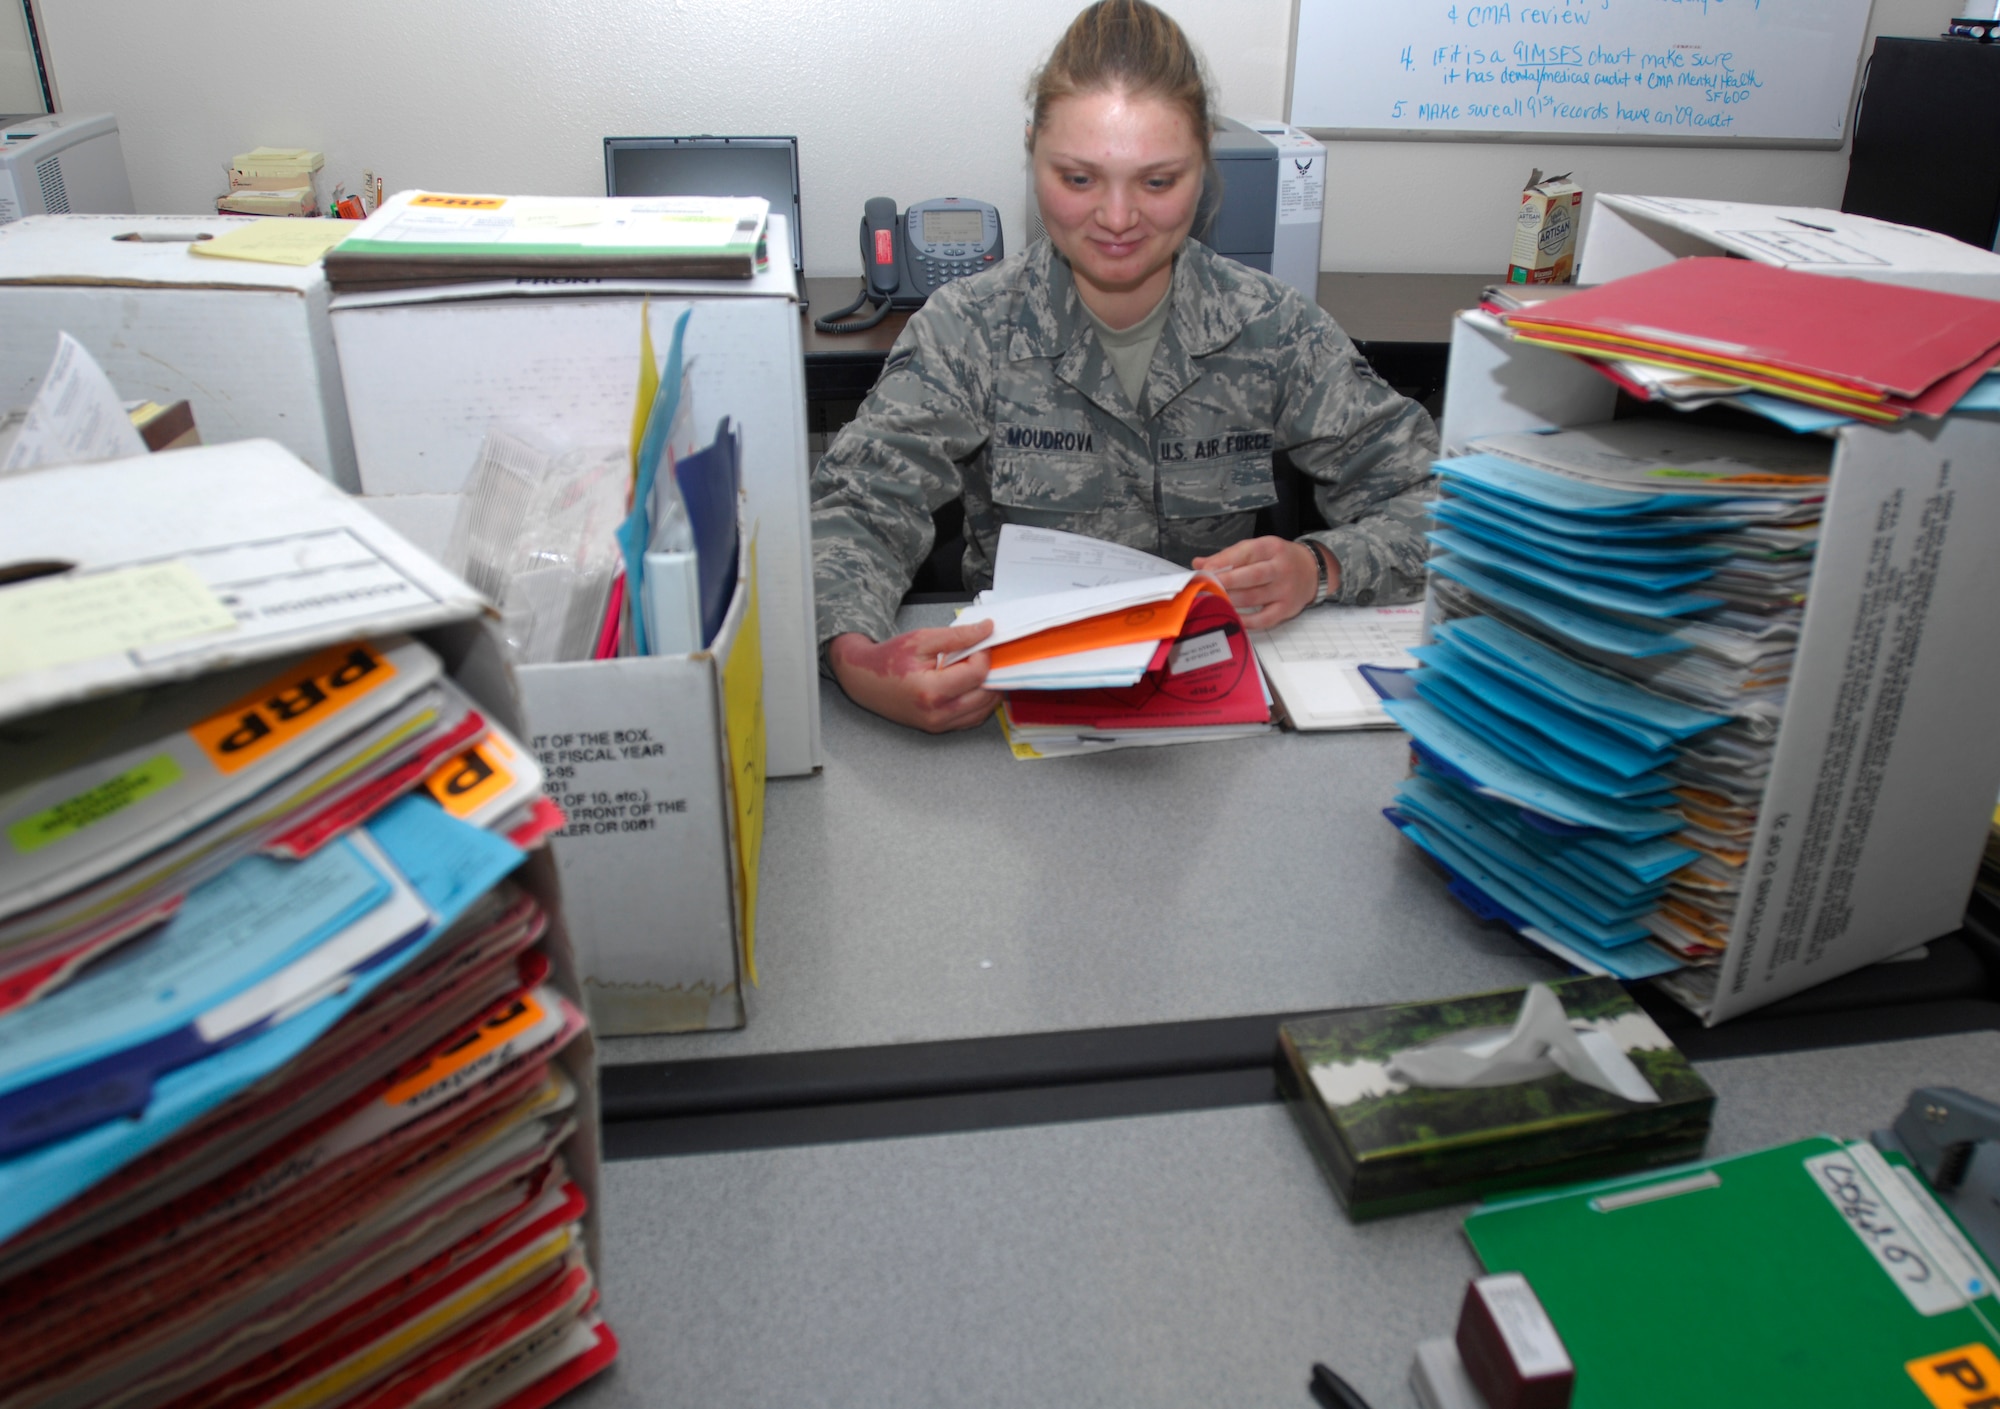 MINOT AIR FORCE BASE, N.D. -- Airman First Class Elena Moudrova, a medical technician in the Personal reliability Program clinic sorts through just a few of the hundreds of files for the members who are on PRP.  The program is designed to ensure that each member who performs duties involving nuclear weapons meet certain criteria to guarantee the safety, security and reliability of nuclear asset. Due to the programs strict guidelines Airmen on PRP status must see specialized doctors than others whom are not.( U.S. Air force Photo by Staff Sgt. Stacy Moless)